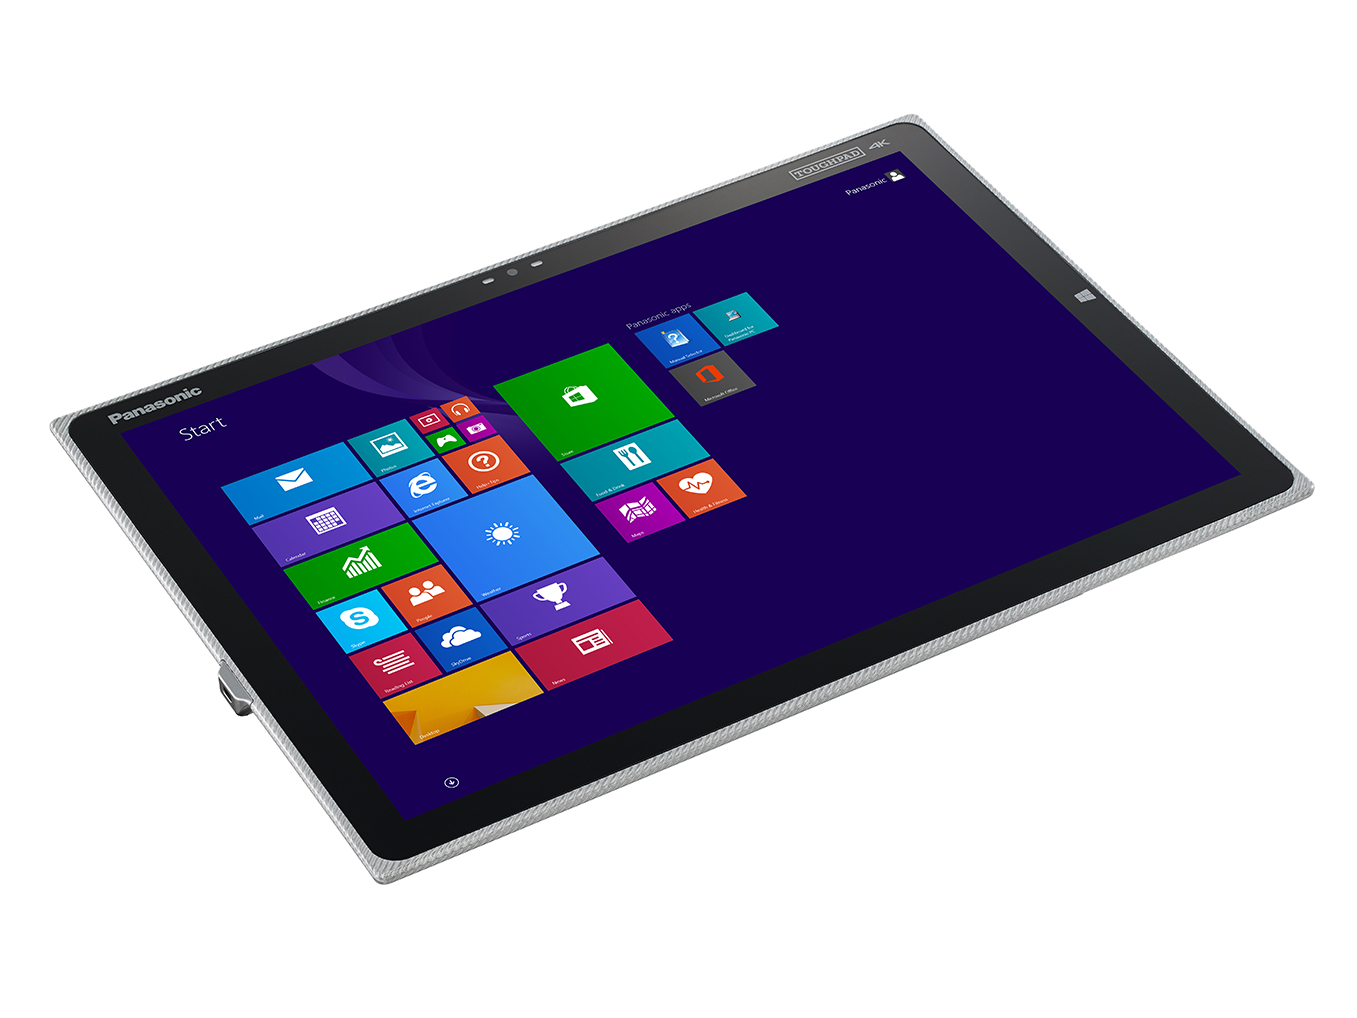 Panasonic updates Toughpad 4K tablet with latest i5 processors